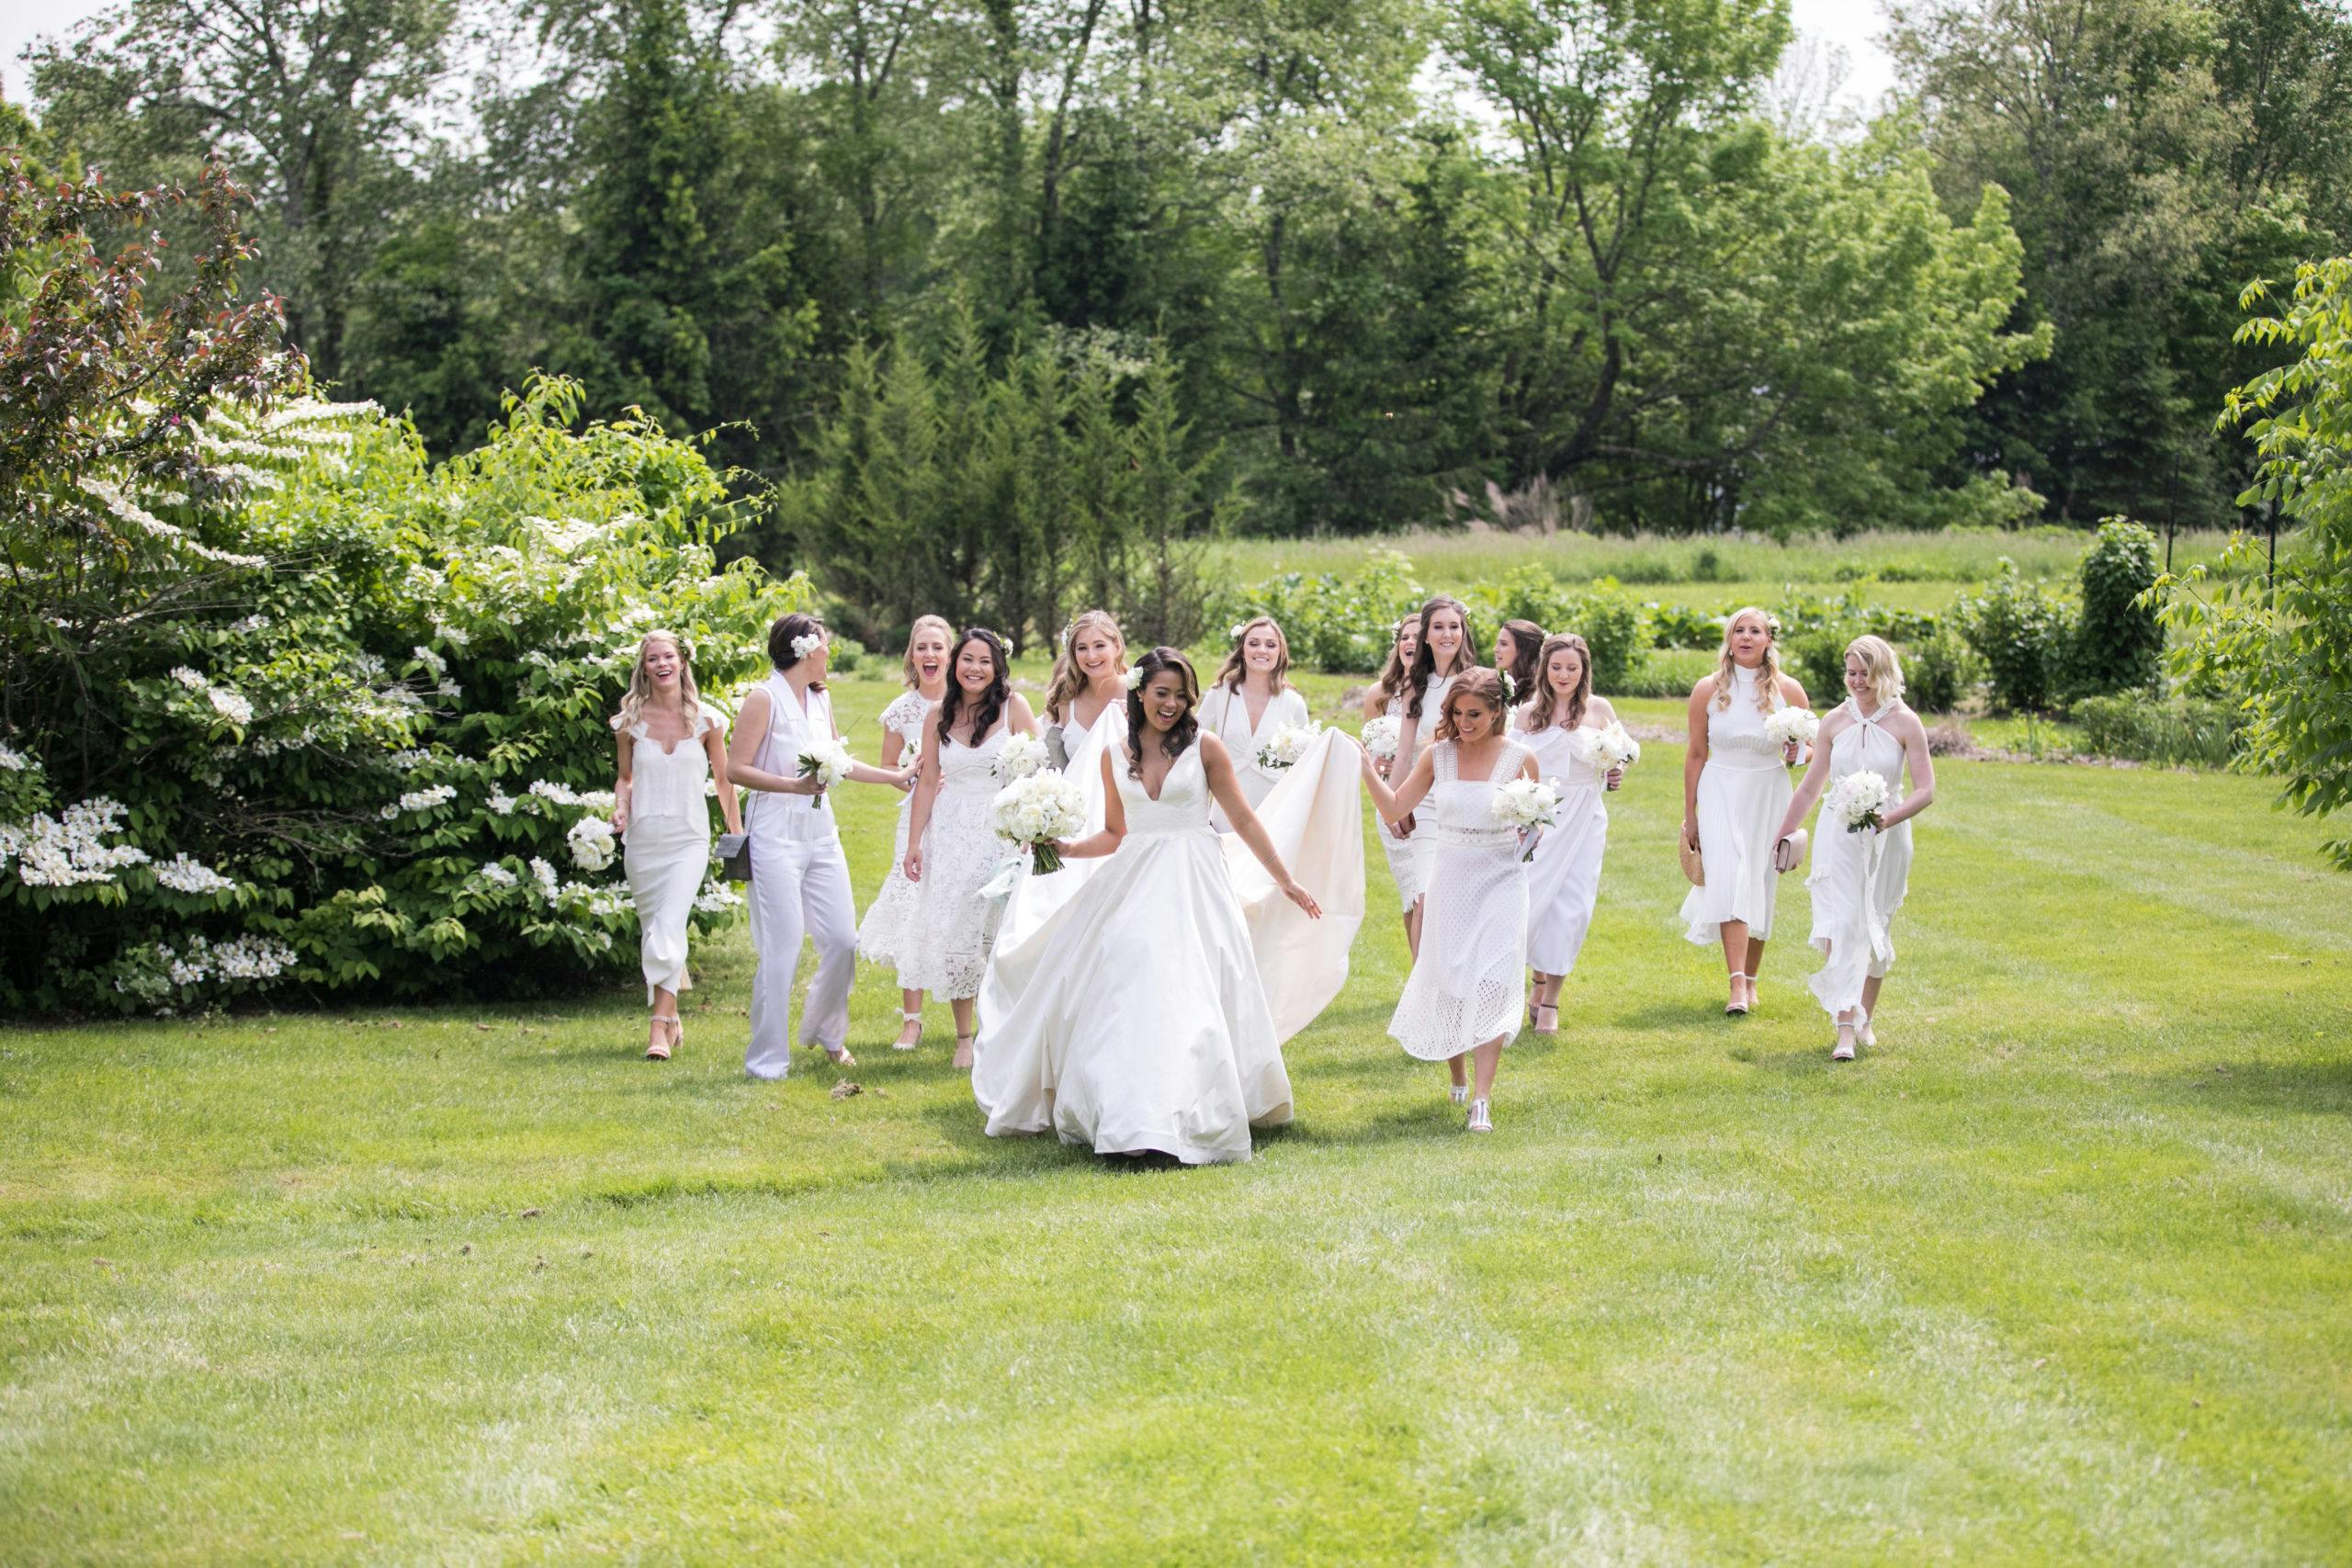 Bridal party in all white running through greenery field | PartySlate